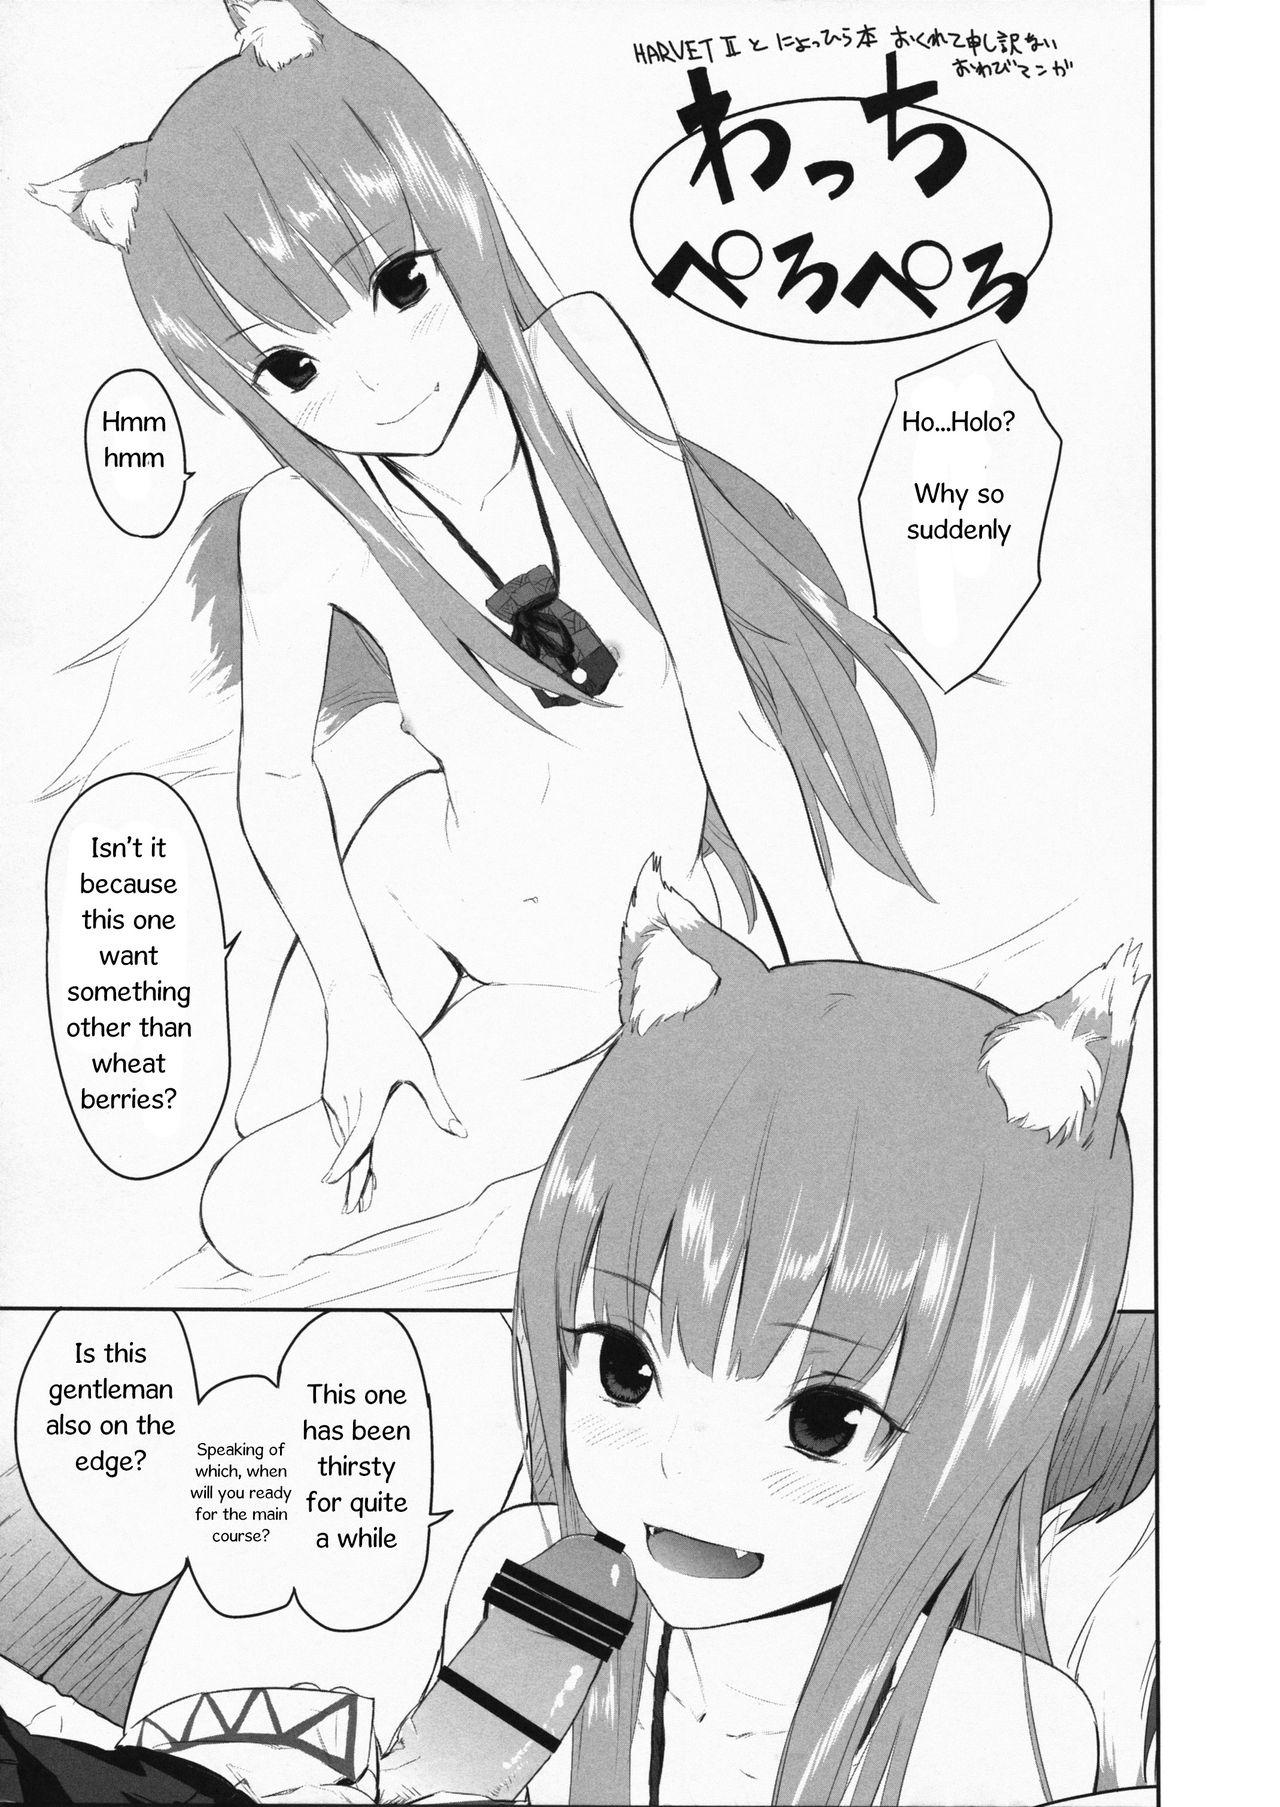 Reversecowgirl Ajisai Maiden vol.1 - Code geass Spice and wolf Un go Fantasy - Page 11